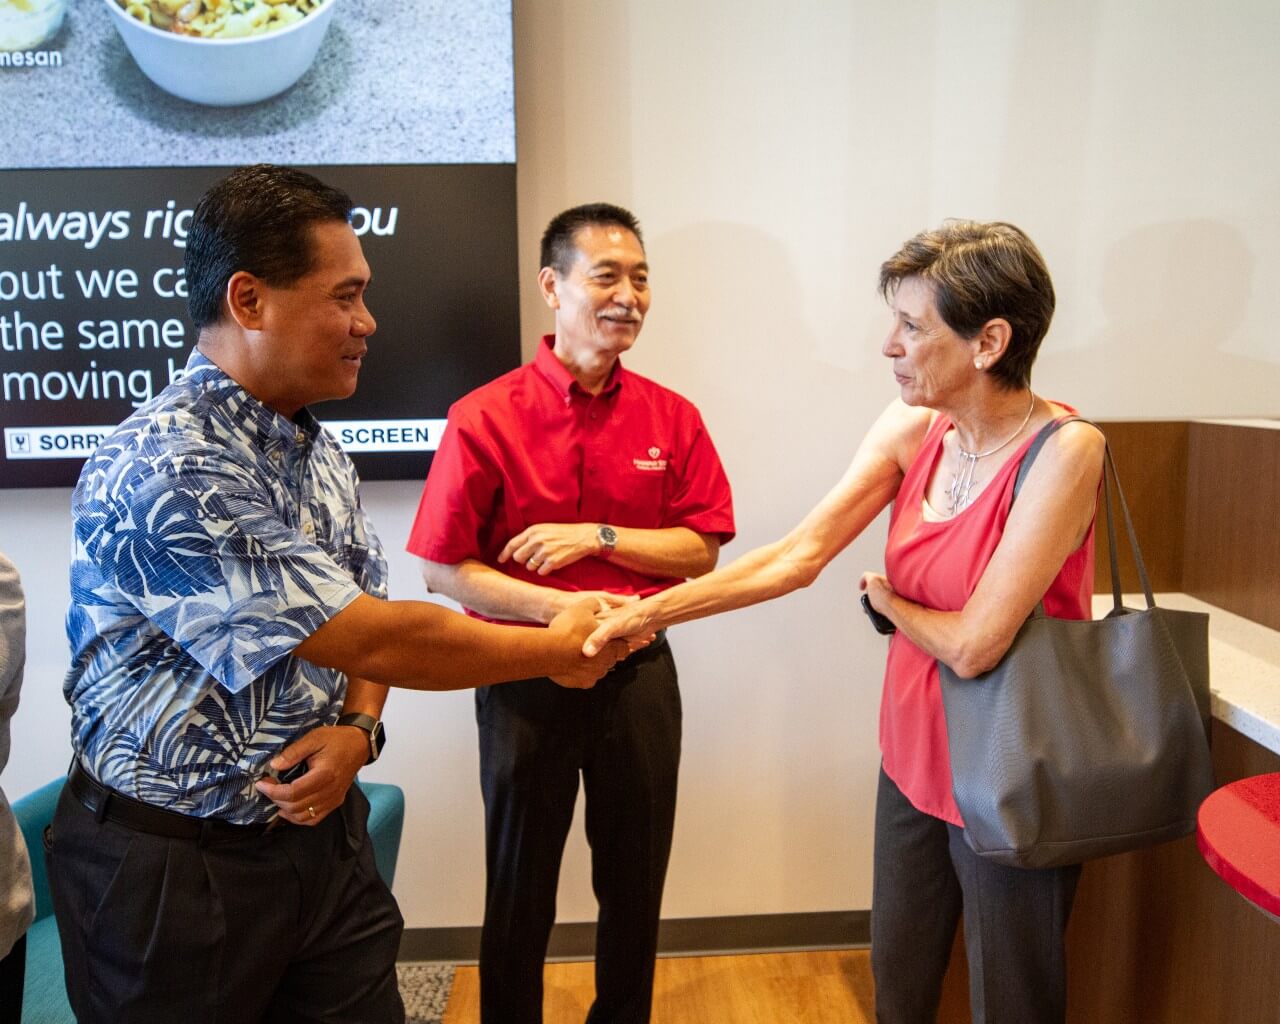 A man shakes hands with a woman as another man stands between them, illustrating a personal greeting as part of a welcoming banking customer experience.